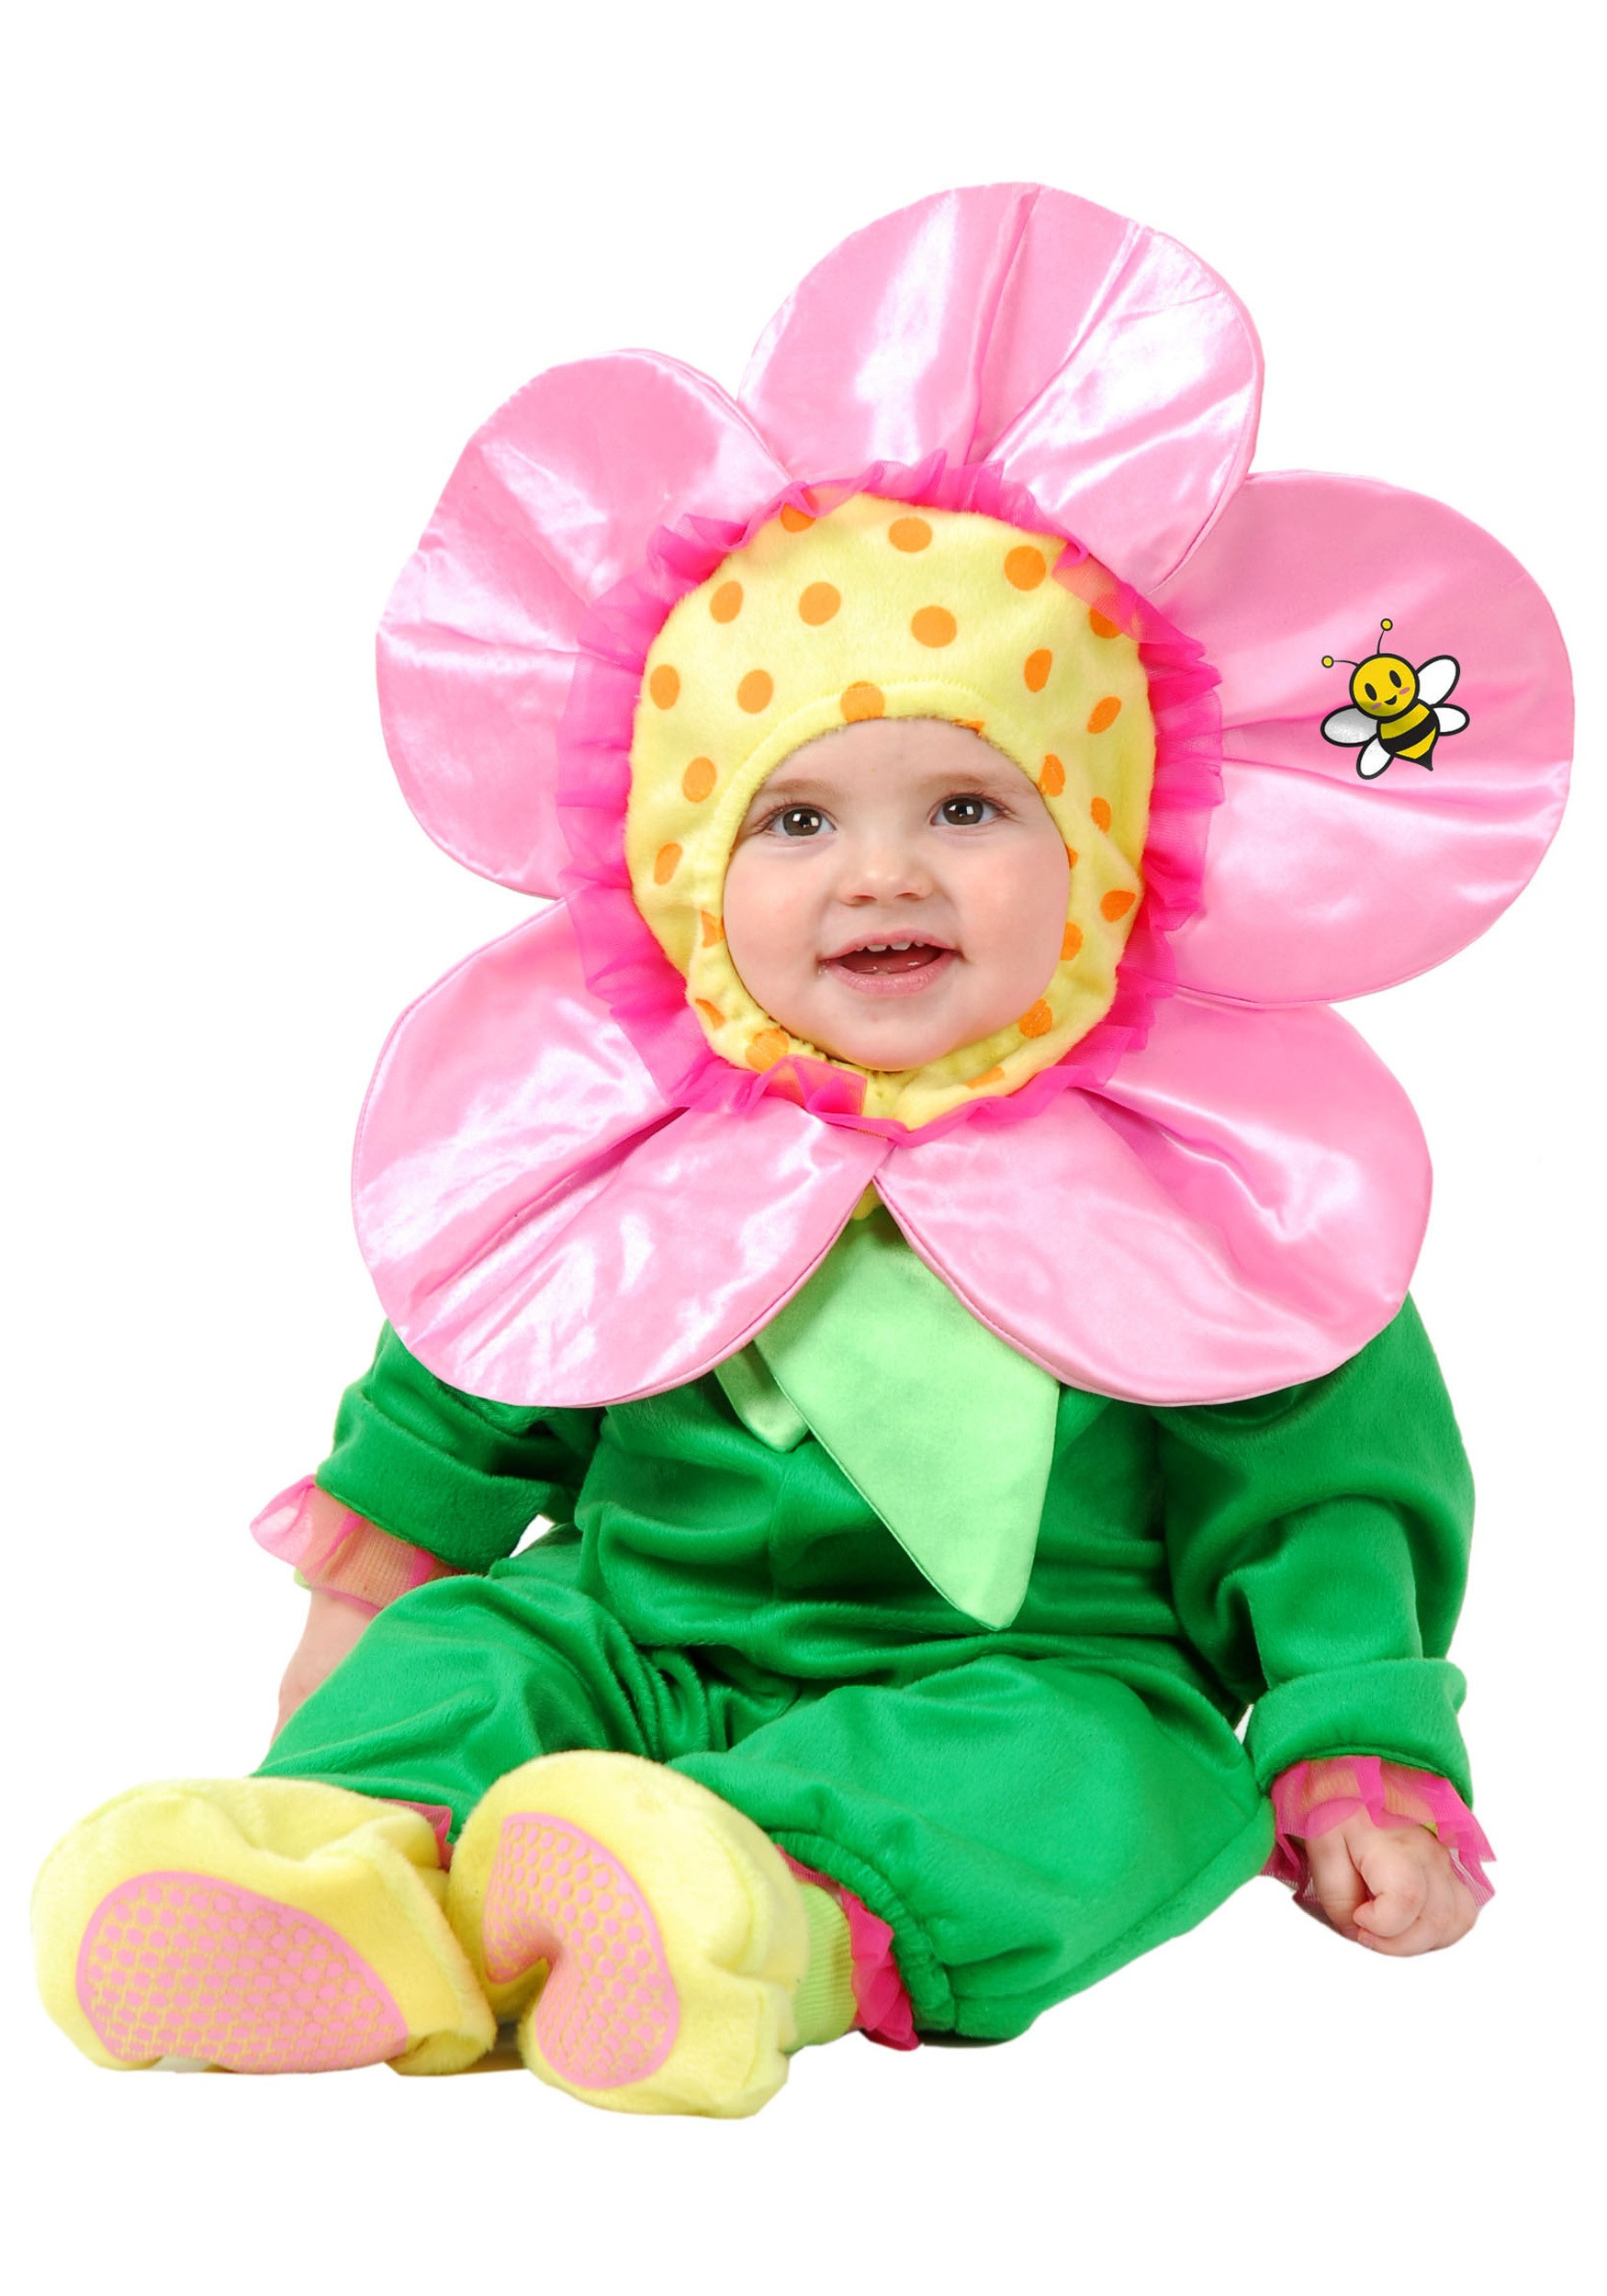 Baby Flower Halloween Costumes
 Little Flower Baby Costume Infant and Toddler Easter